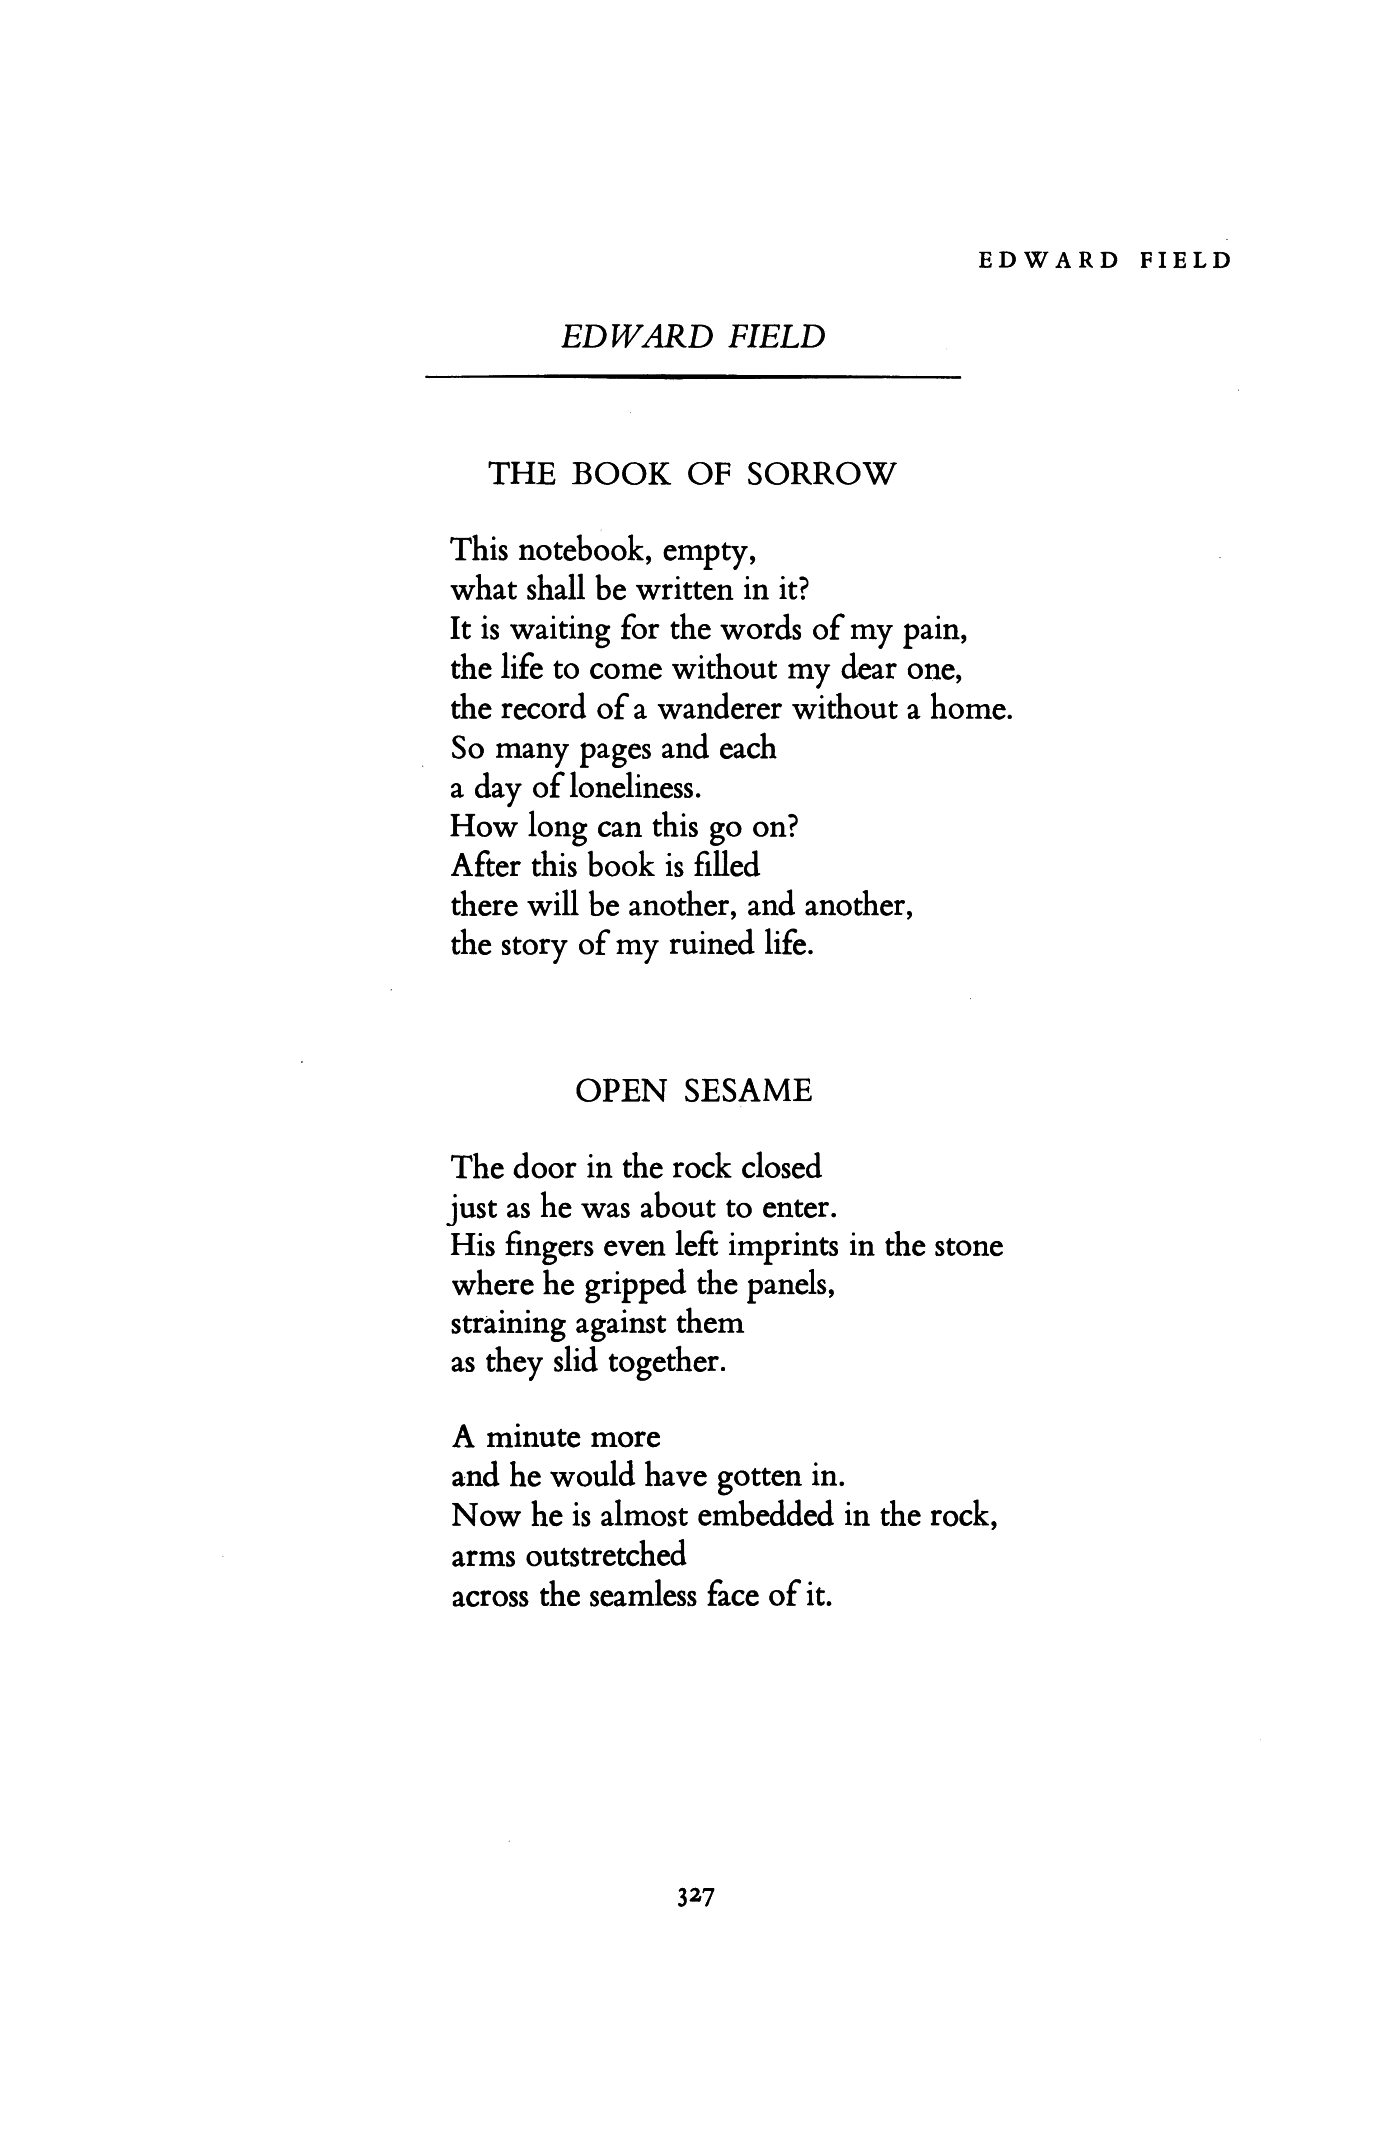 On Another's Sorrow (Poem + Analysis)